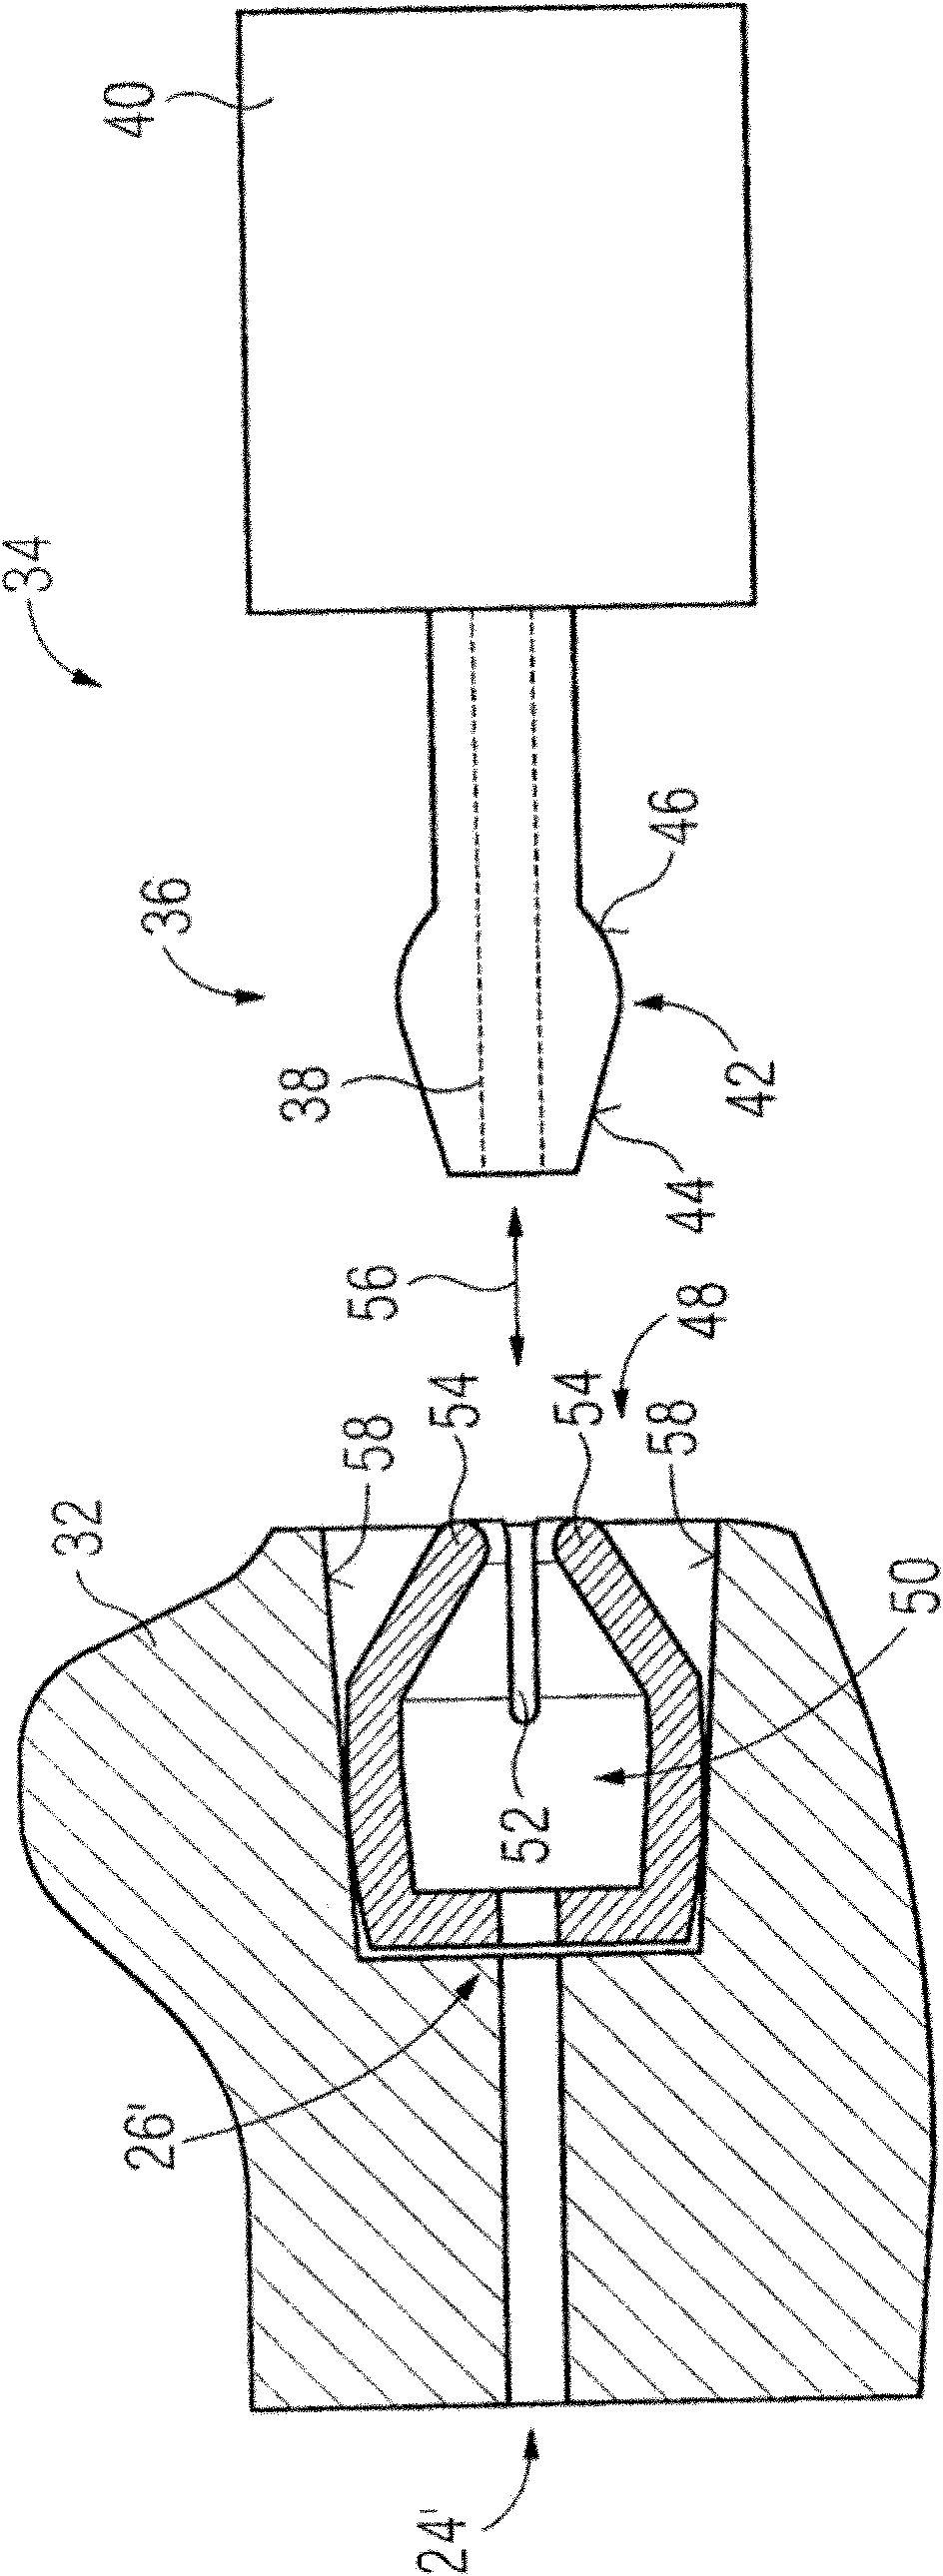 Hearing aid with removable attached earpiece